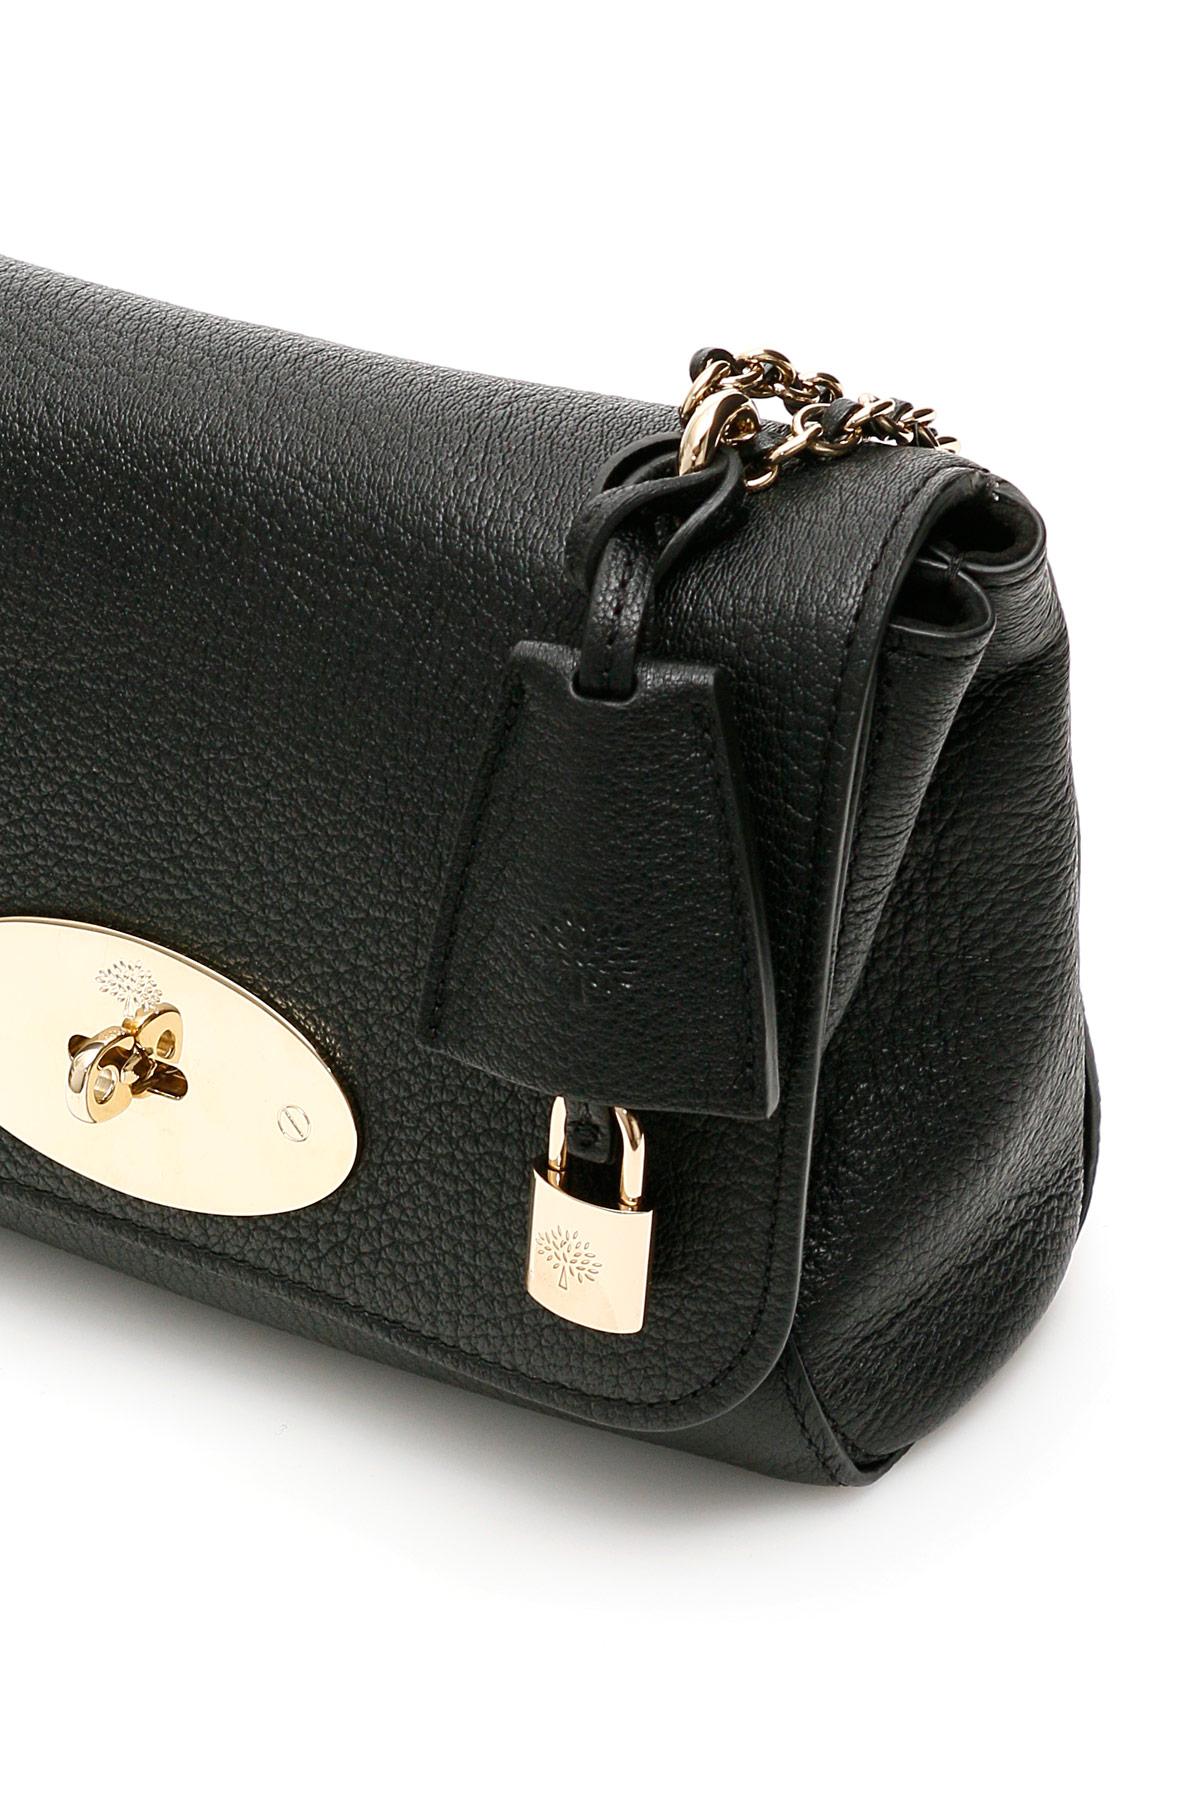 Mulberry Lily Small Bag in Black | Lyst